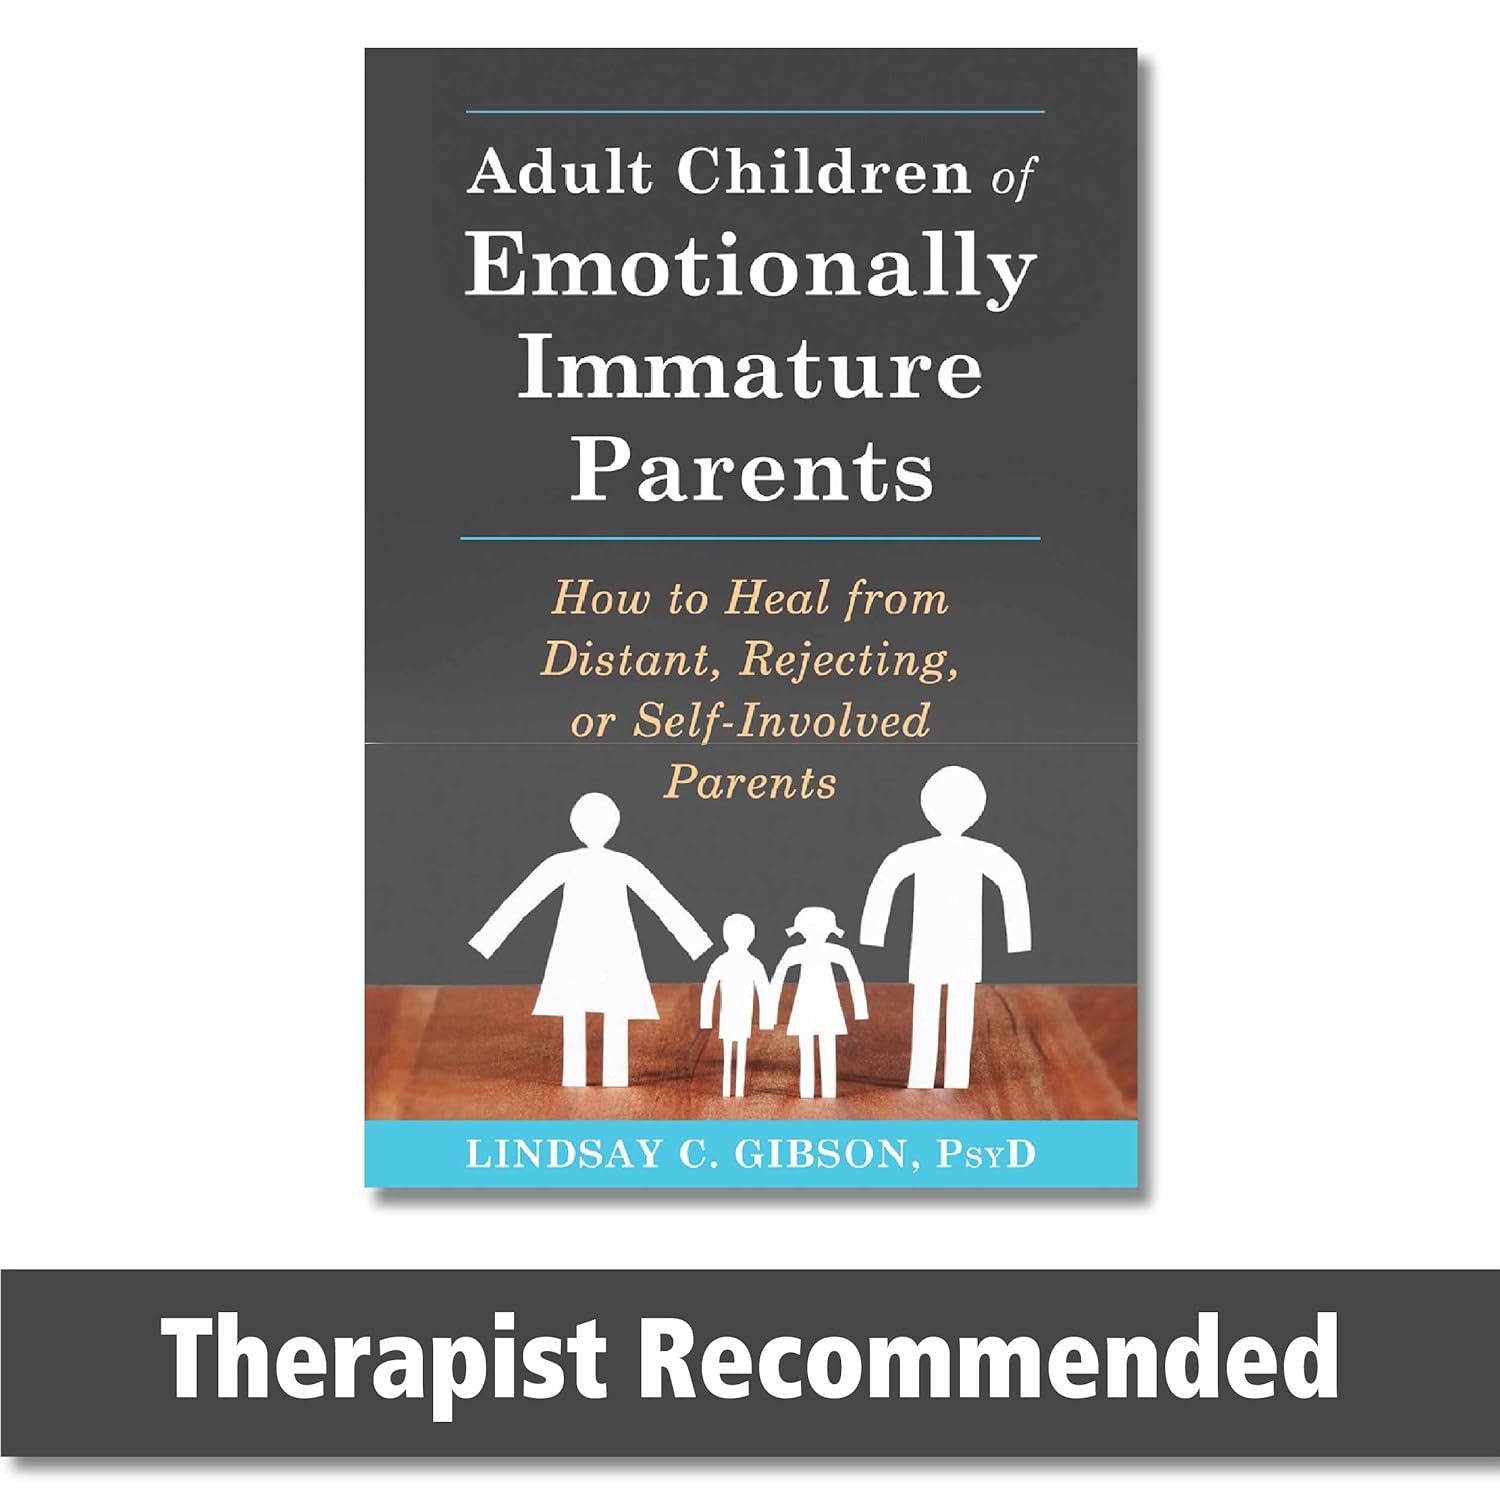 Adult Children of Emotionally Immature Parents: How to Heal from Distant